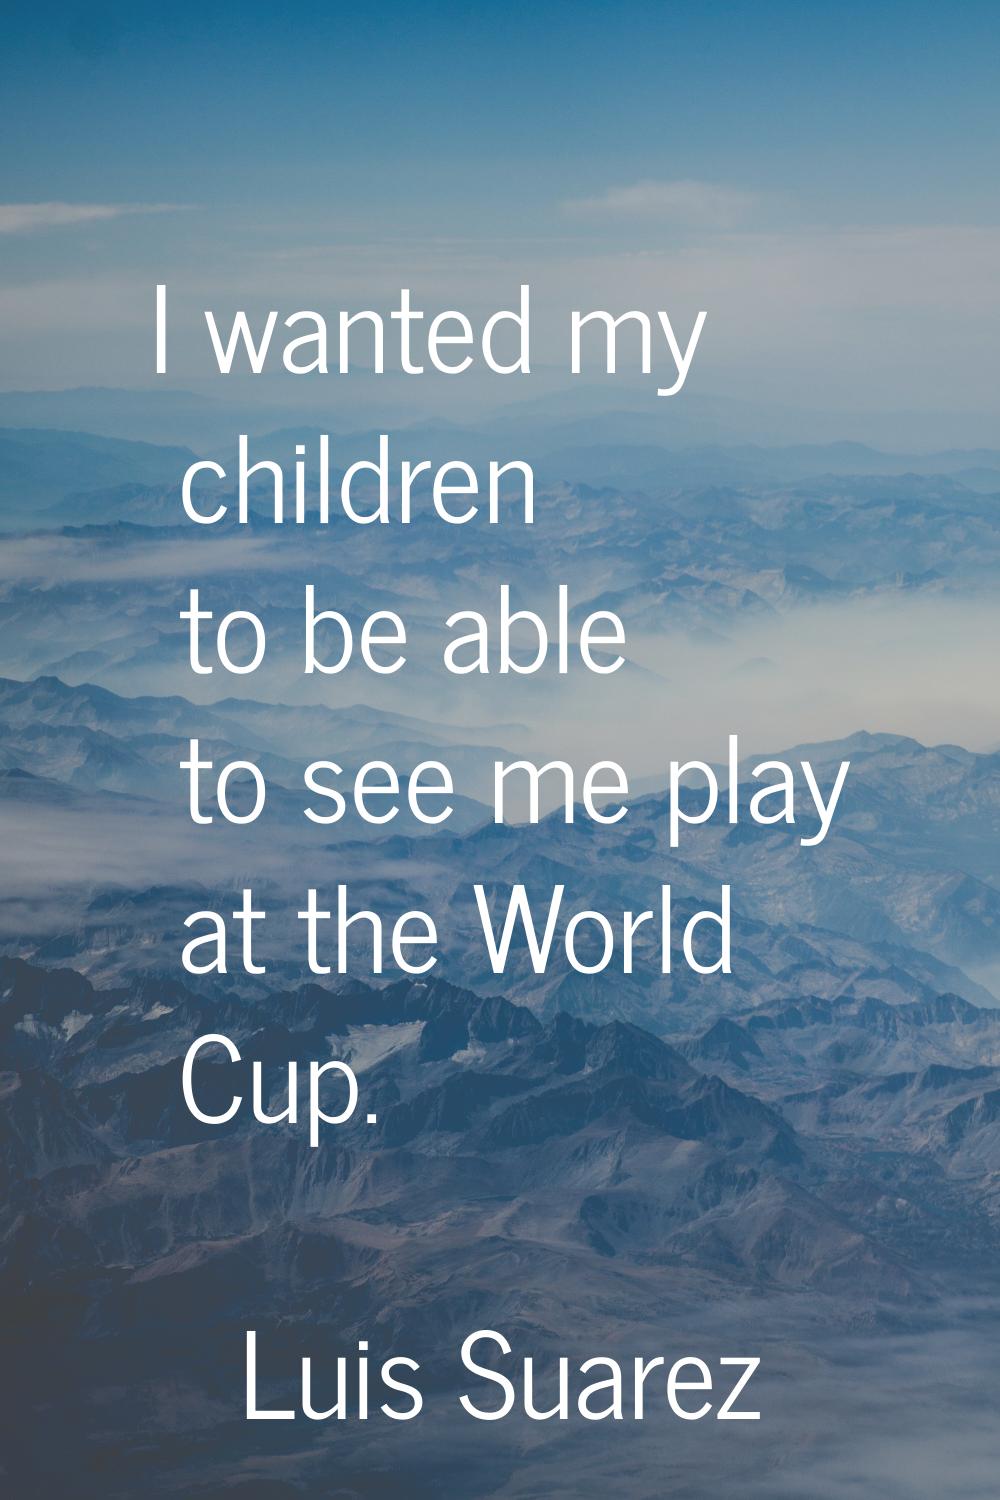 I wanted my children to be able to see me play at the World Cup.